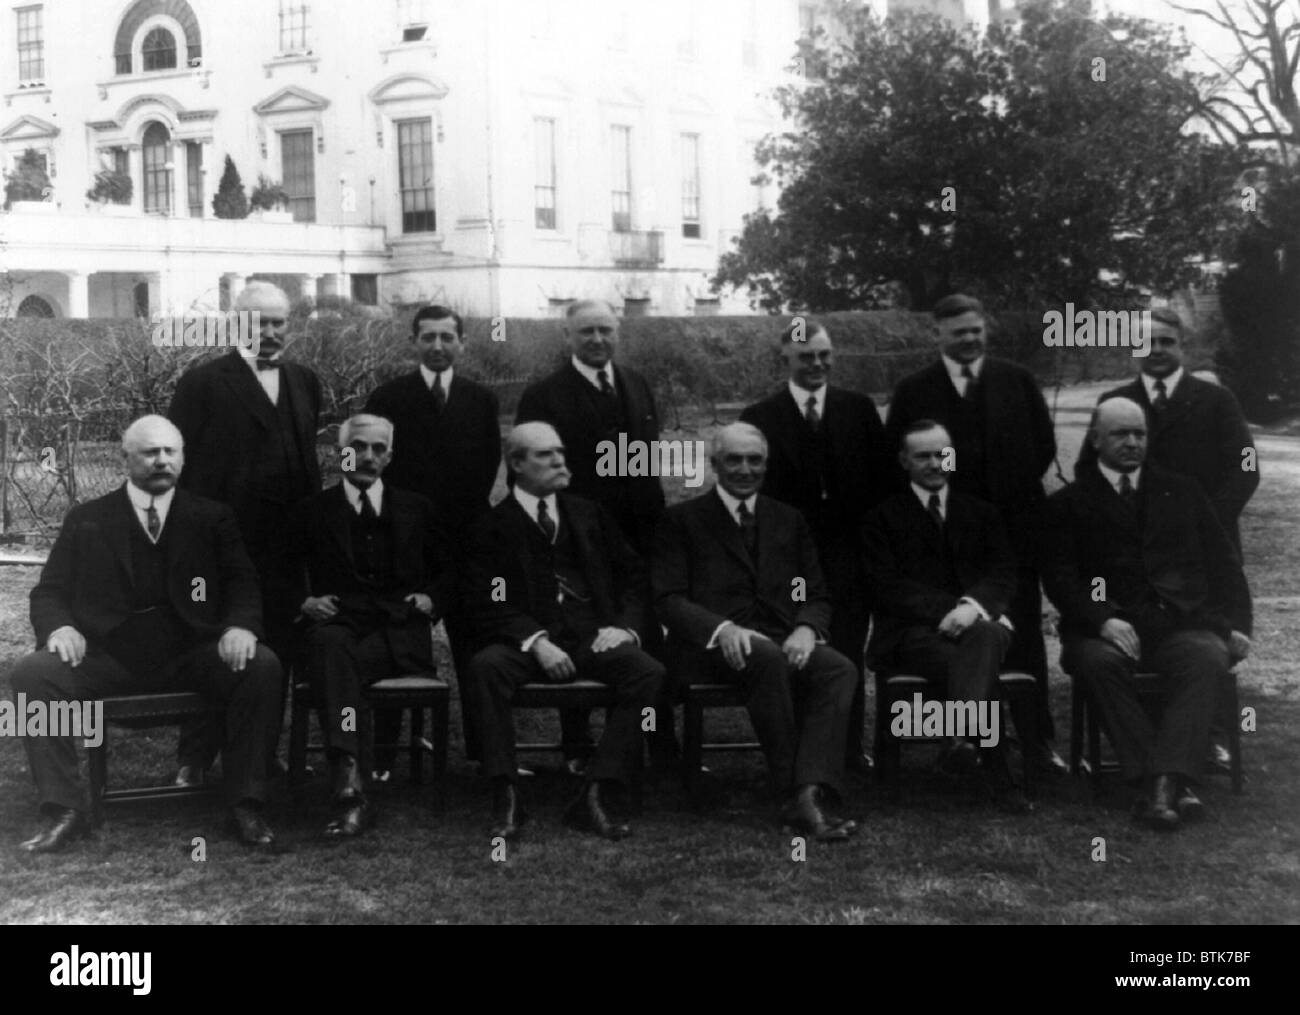 President Warren G. Harding and his cabinet posed on the White House Lawn in 1921. The strong members, Andrew Mellon, Herbert Hoover, and Charles Evans Hughes performed well. The weak and corrupt, notably Harry Daugherty and Albert Fall, ultimately served jail sentences for their activities. Stock Photo